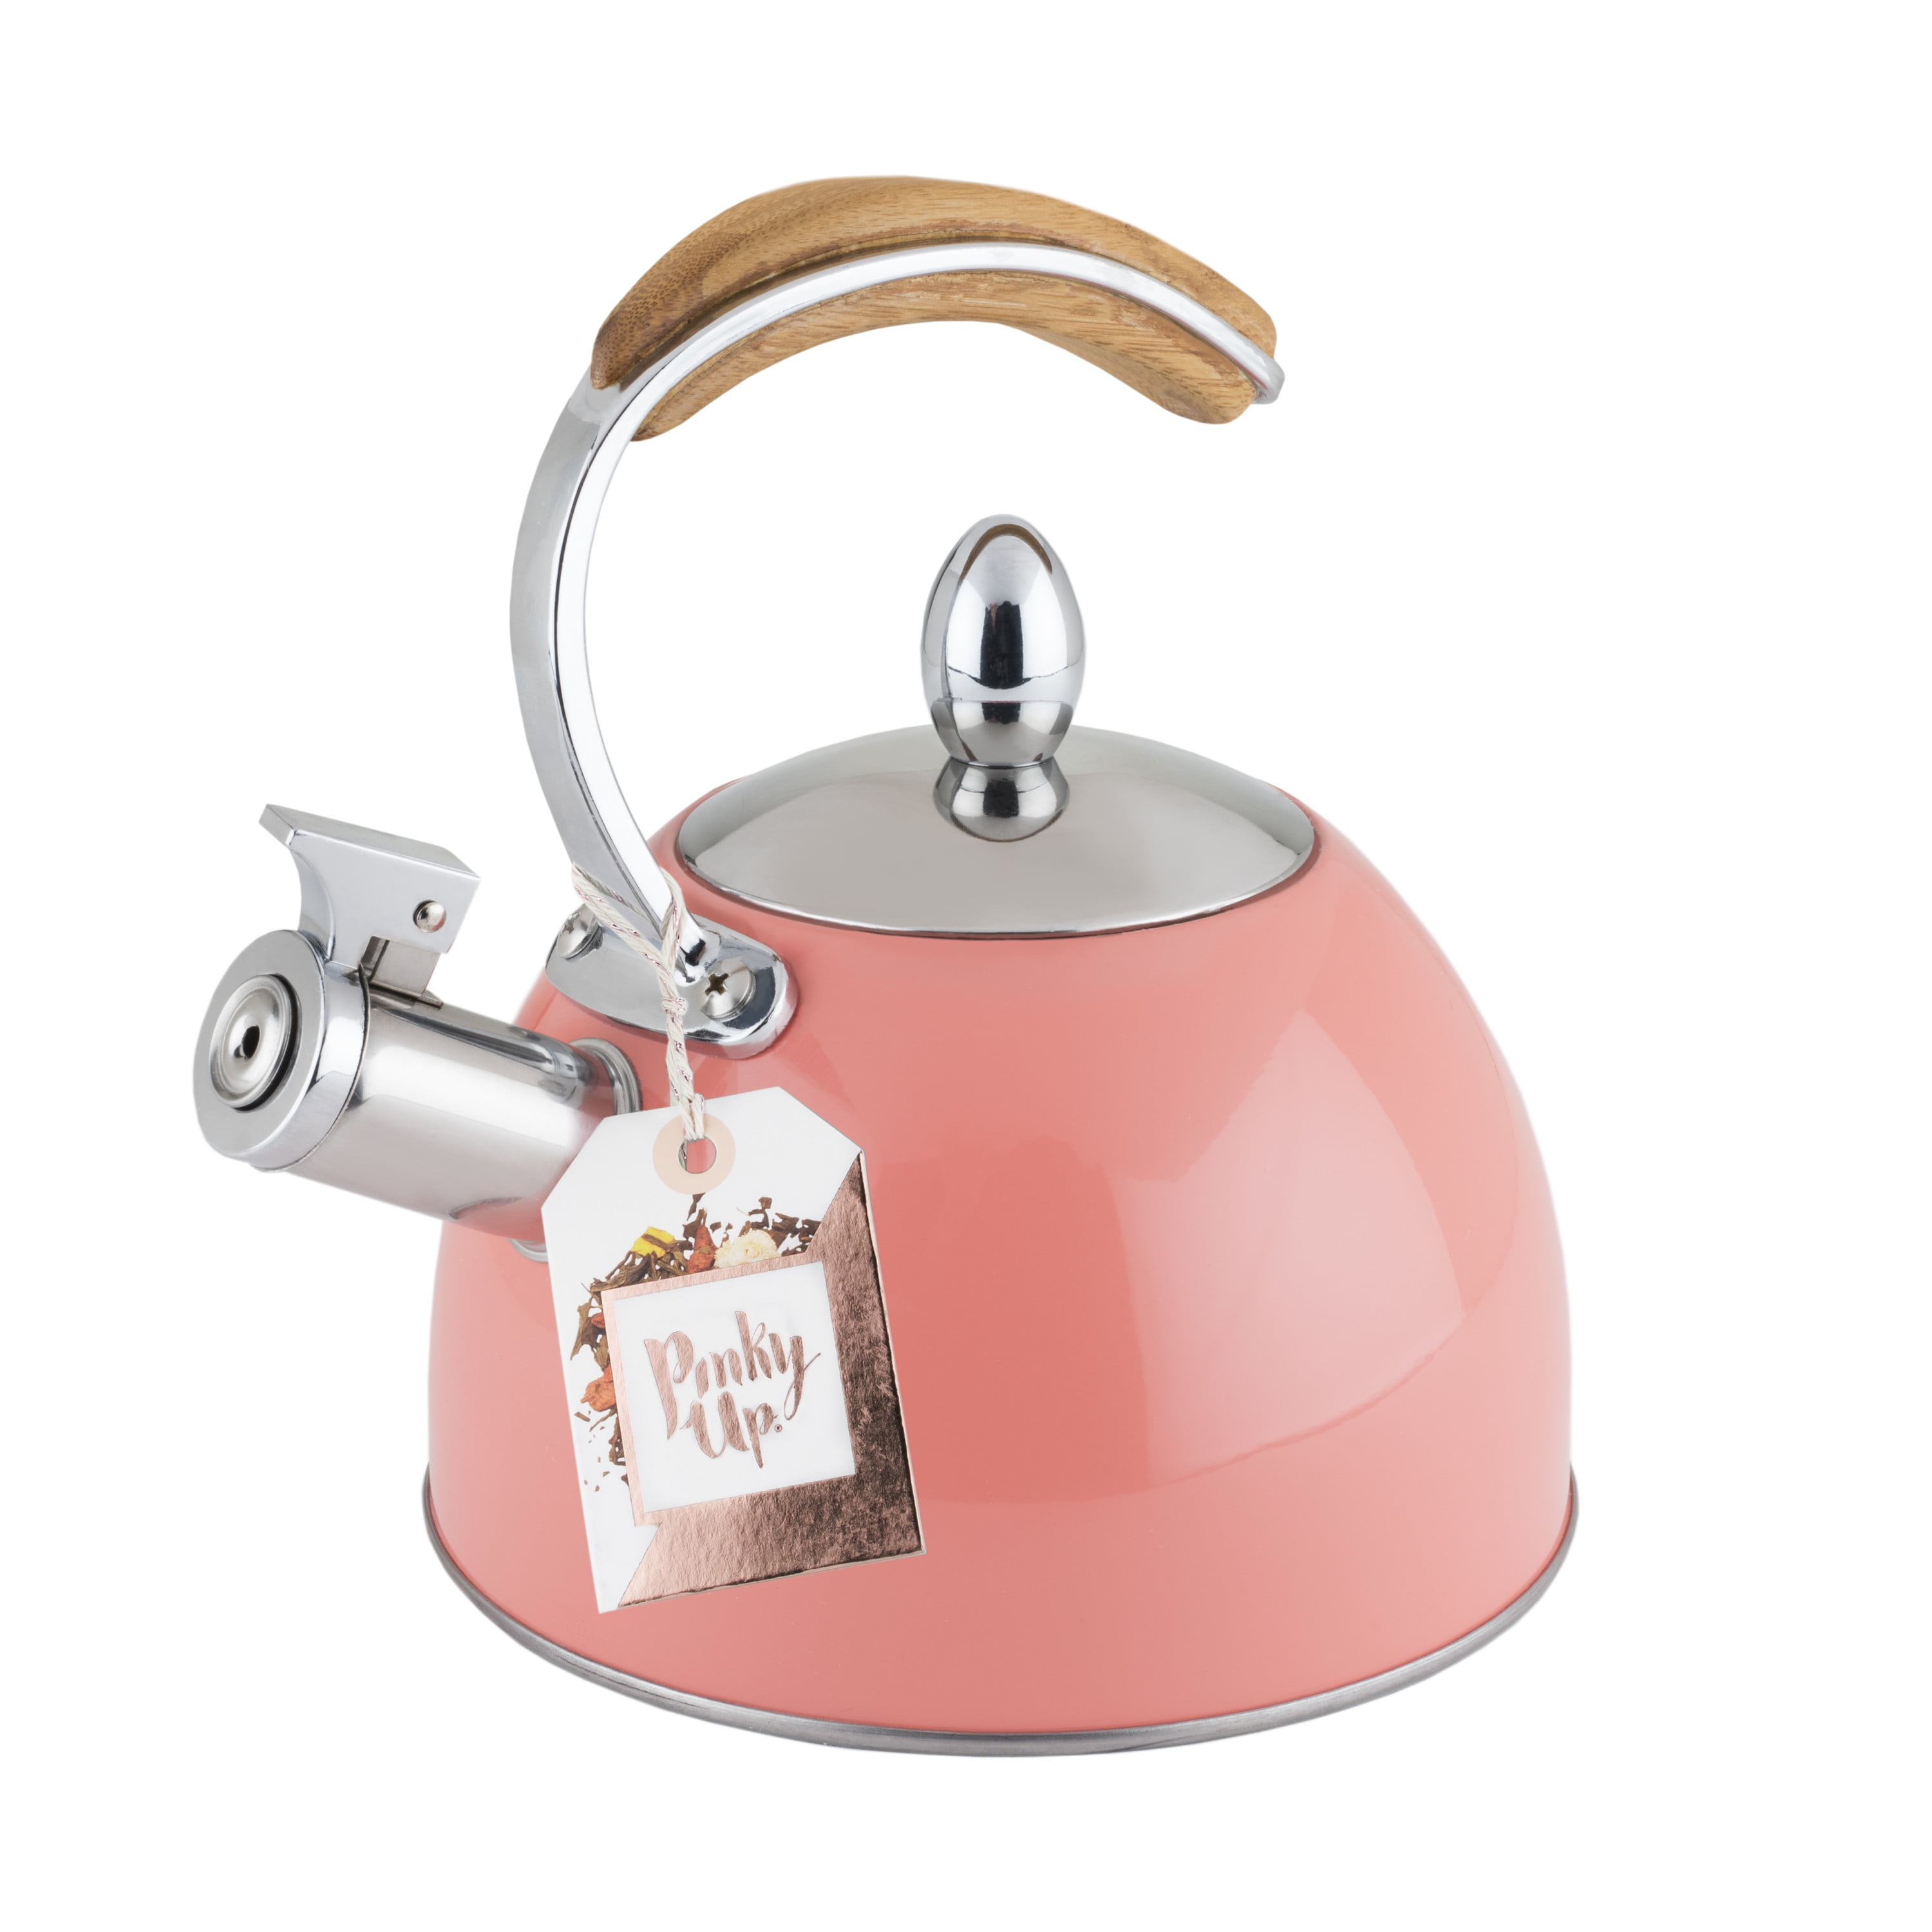 Presley Tea Kettle in Peach by Pinky Up 